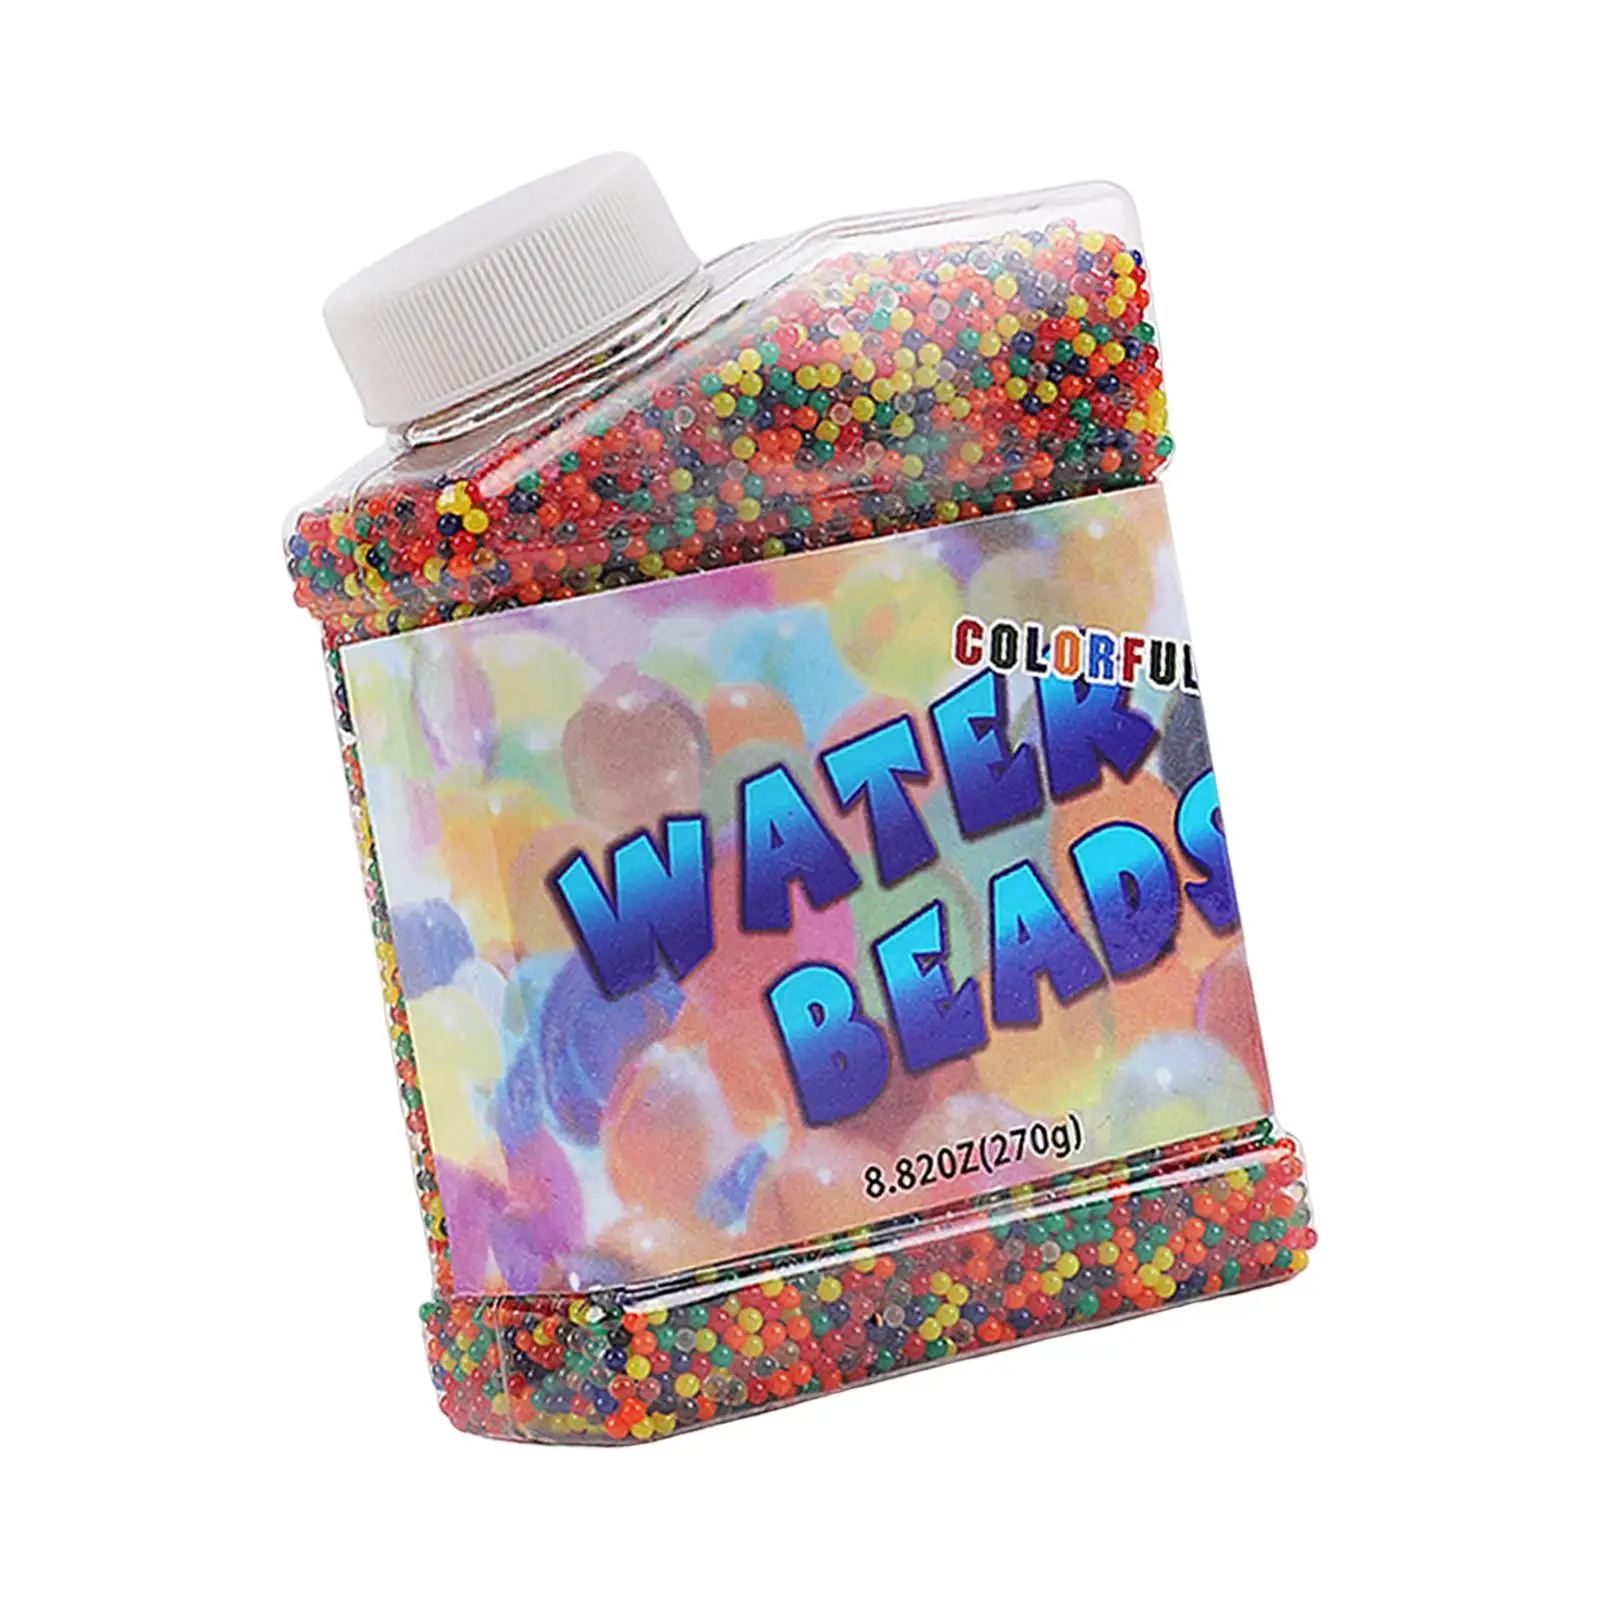 Water Beads Grow in Water Growing Bead Colorful Jelly Bead for Events Home Decoration SPA Refills Fine Motor Skills Party